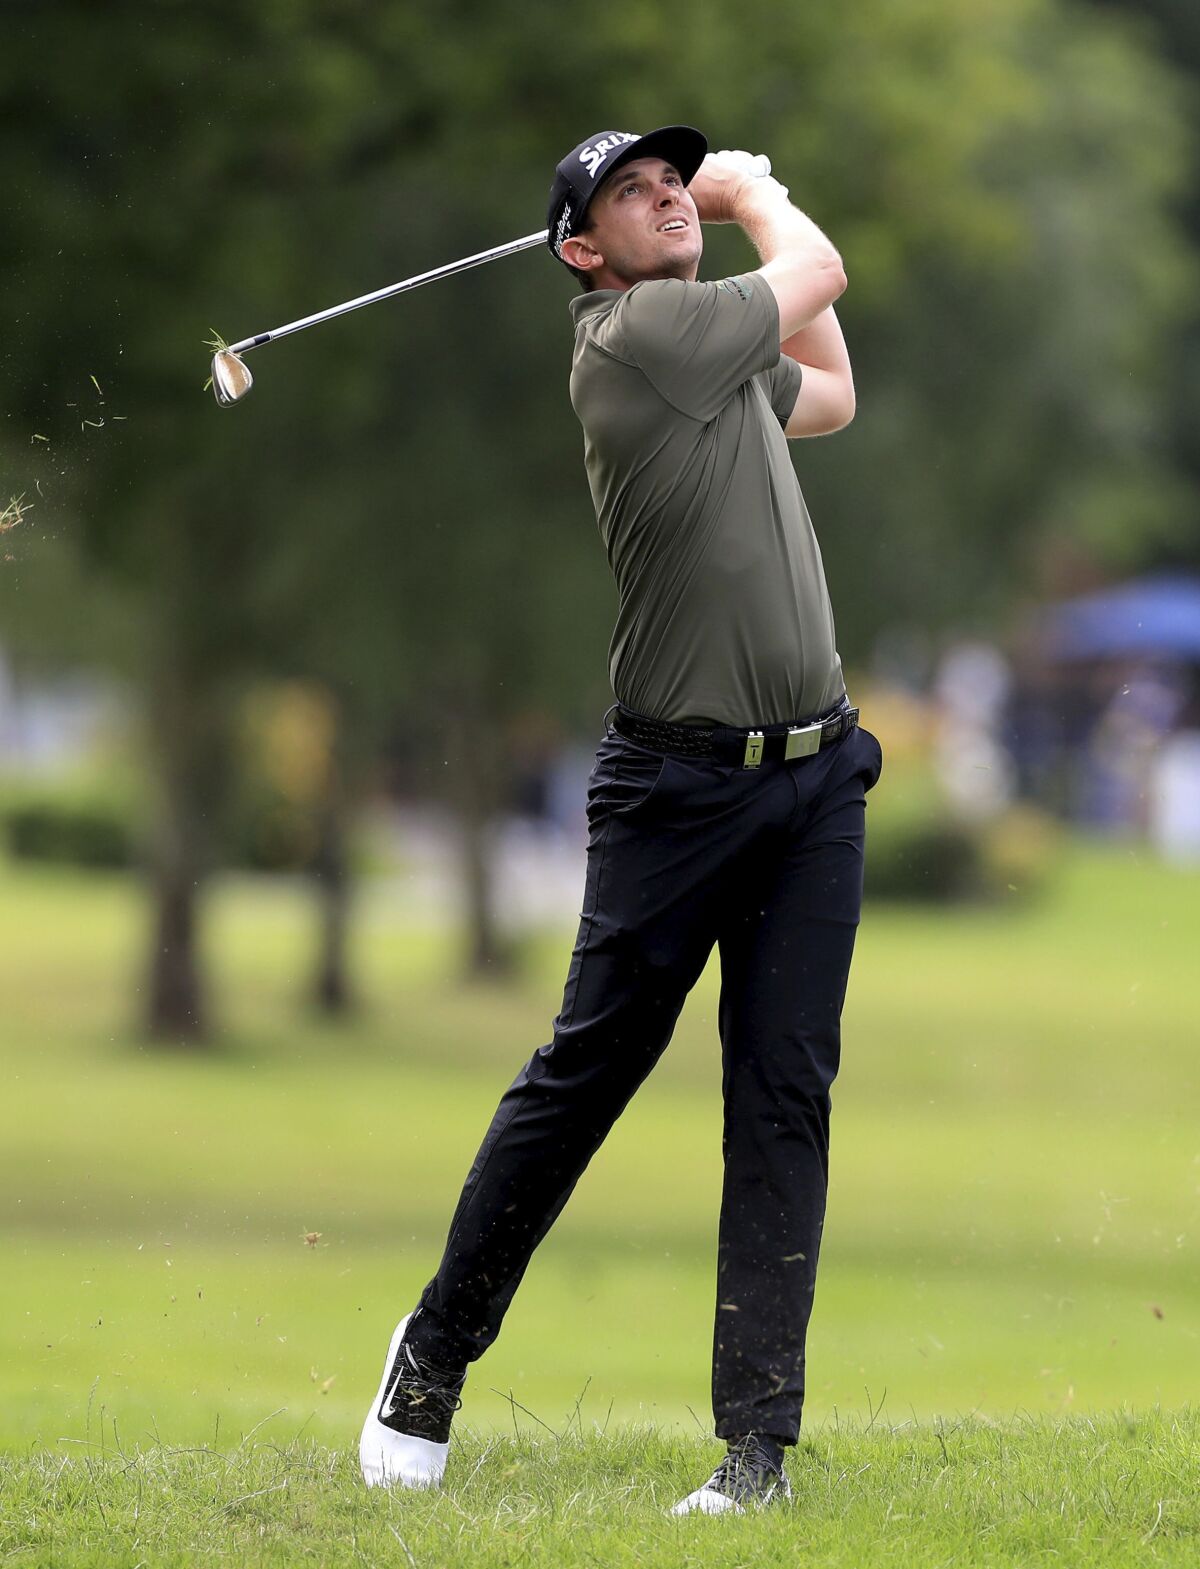 USA's John Catlin during day one of the Hero Open golf tournament at the Forest of Arden Marriott Hotel and Country Club in Birmingham, England, Thursday July 30, 2020. (Mike Egerton/PA via AP)